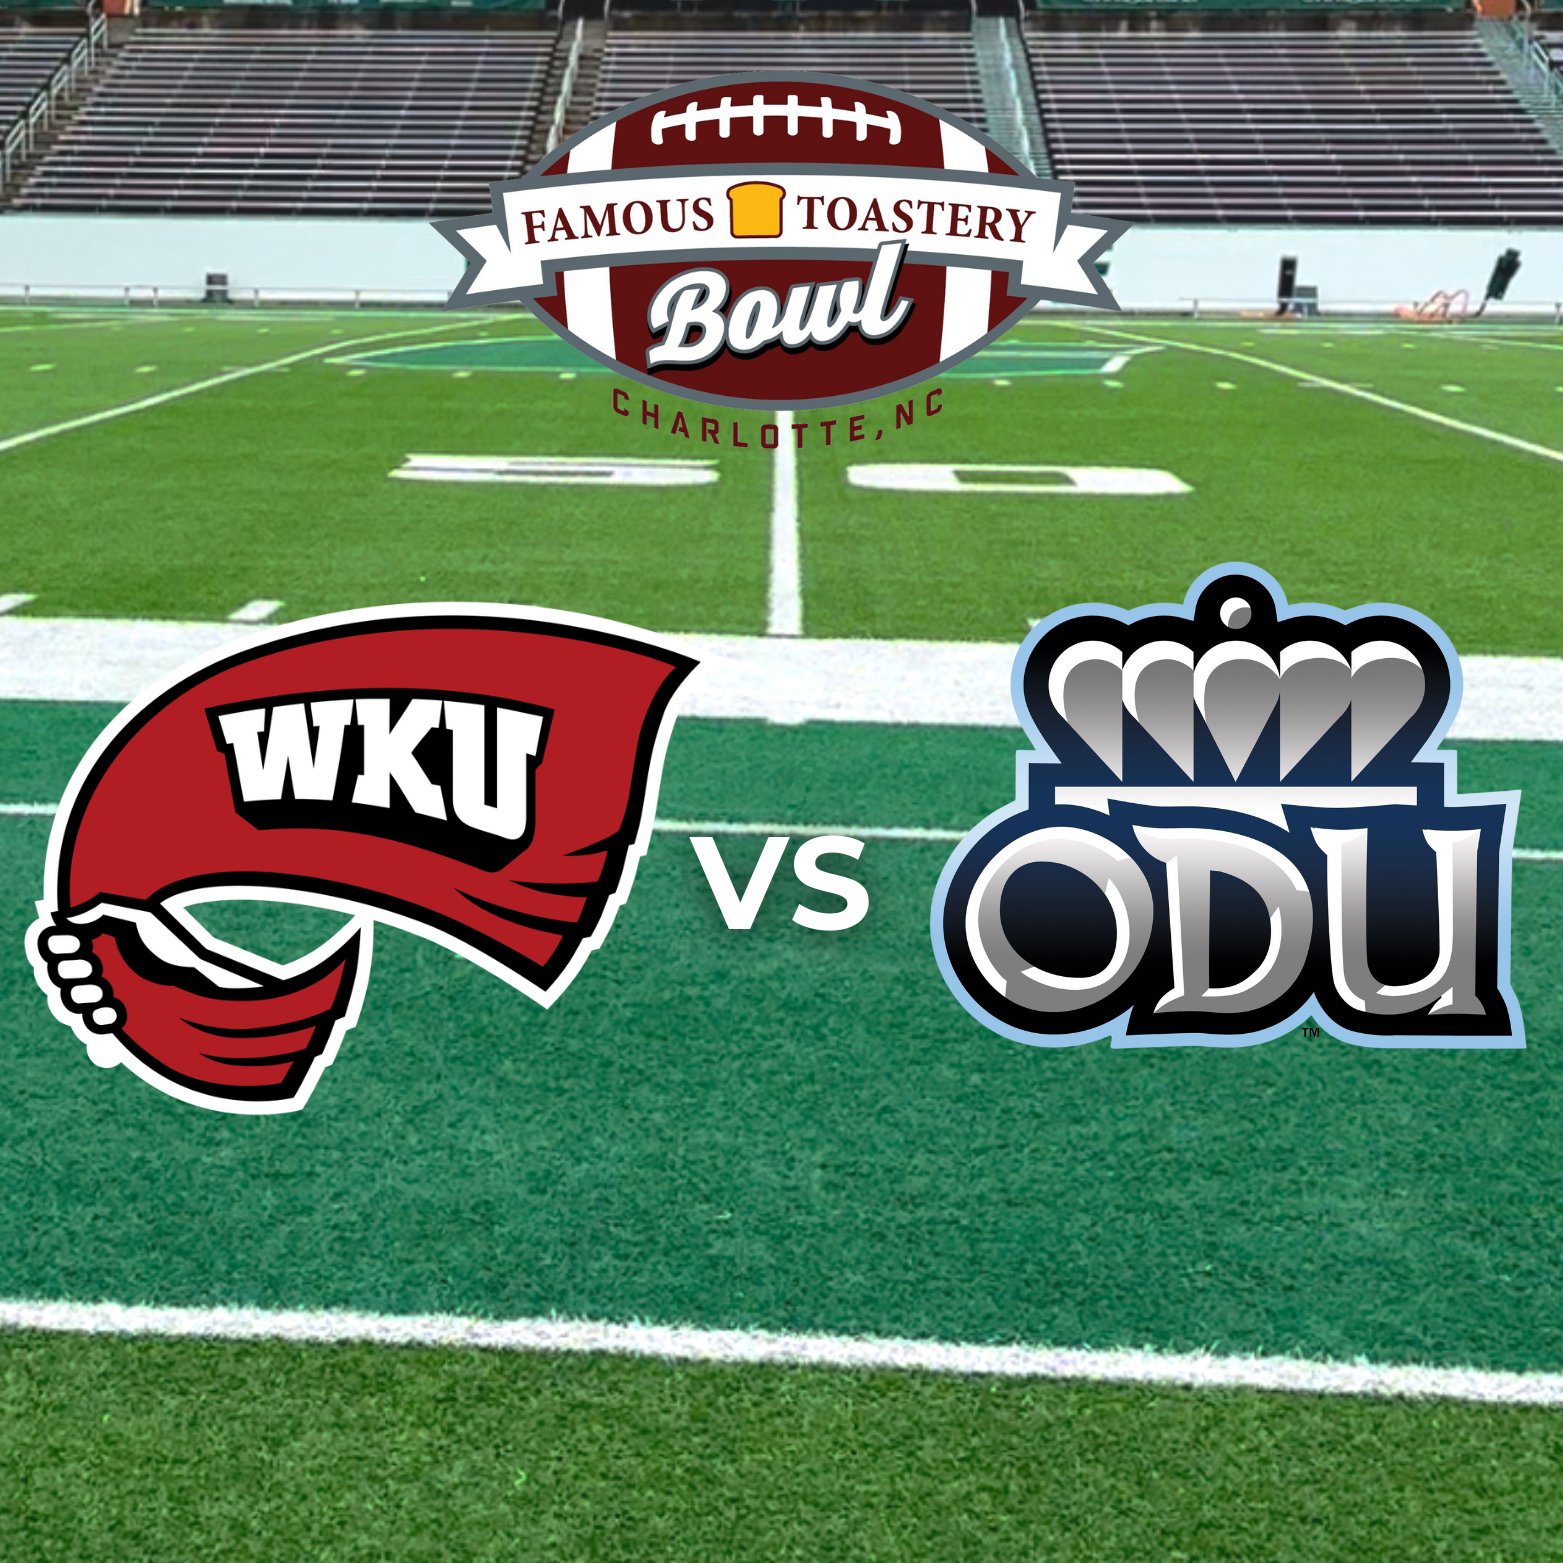 ODU; WKU Square Off in ‘Famous Toastery Bowl’ Game Preview Mace & Crown